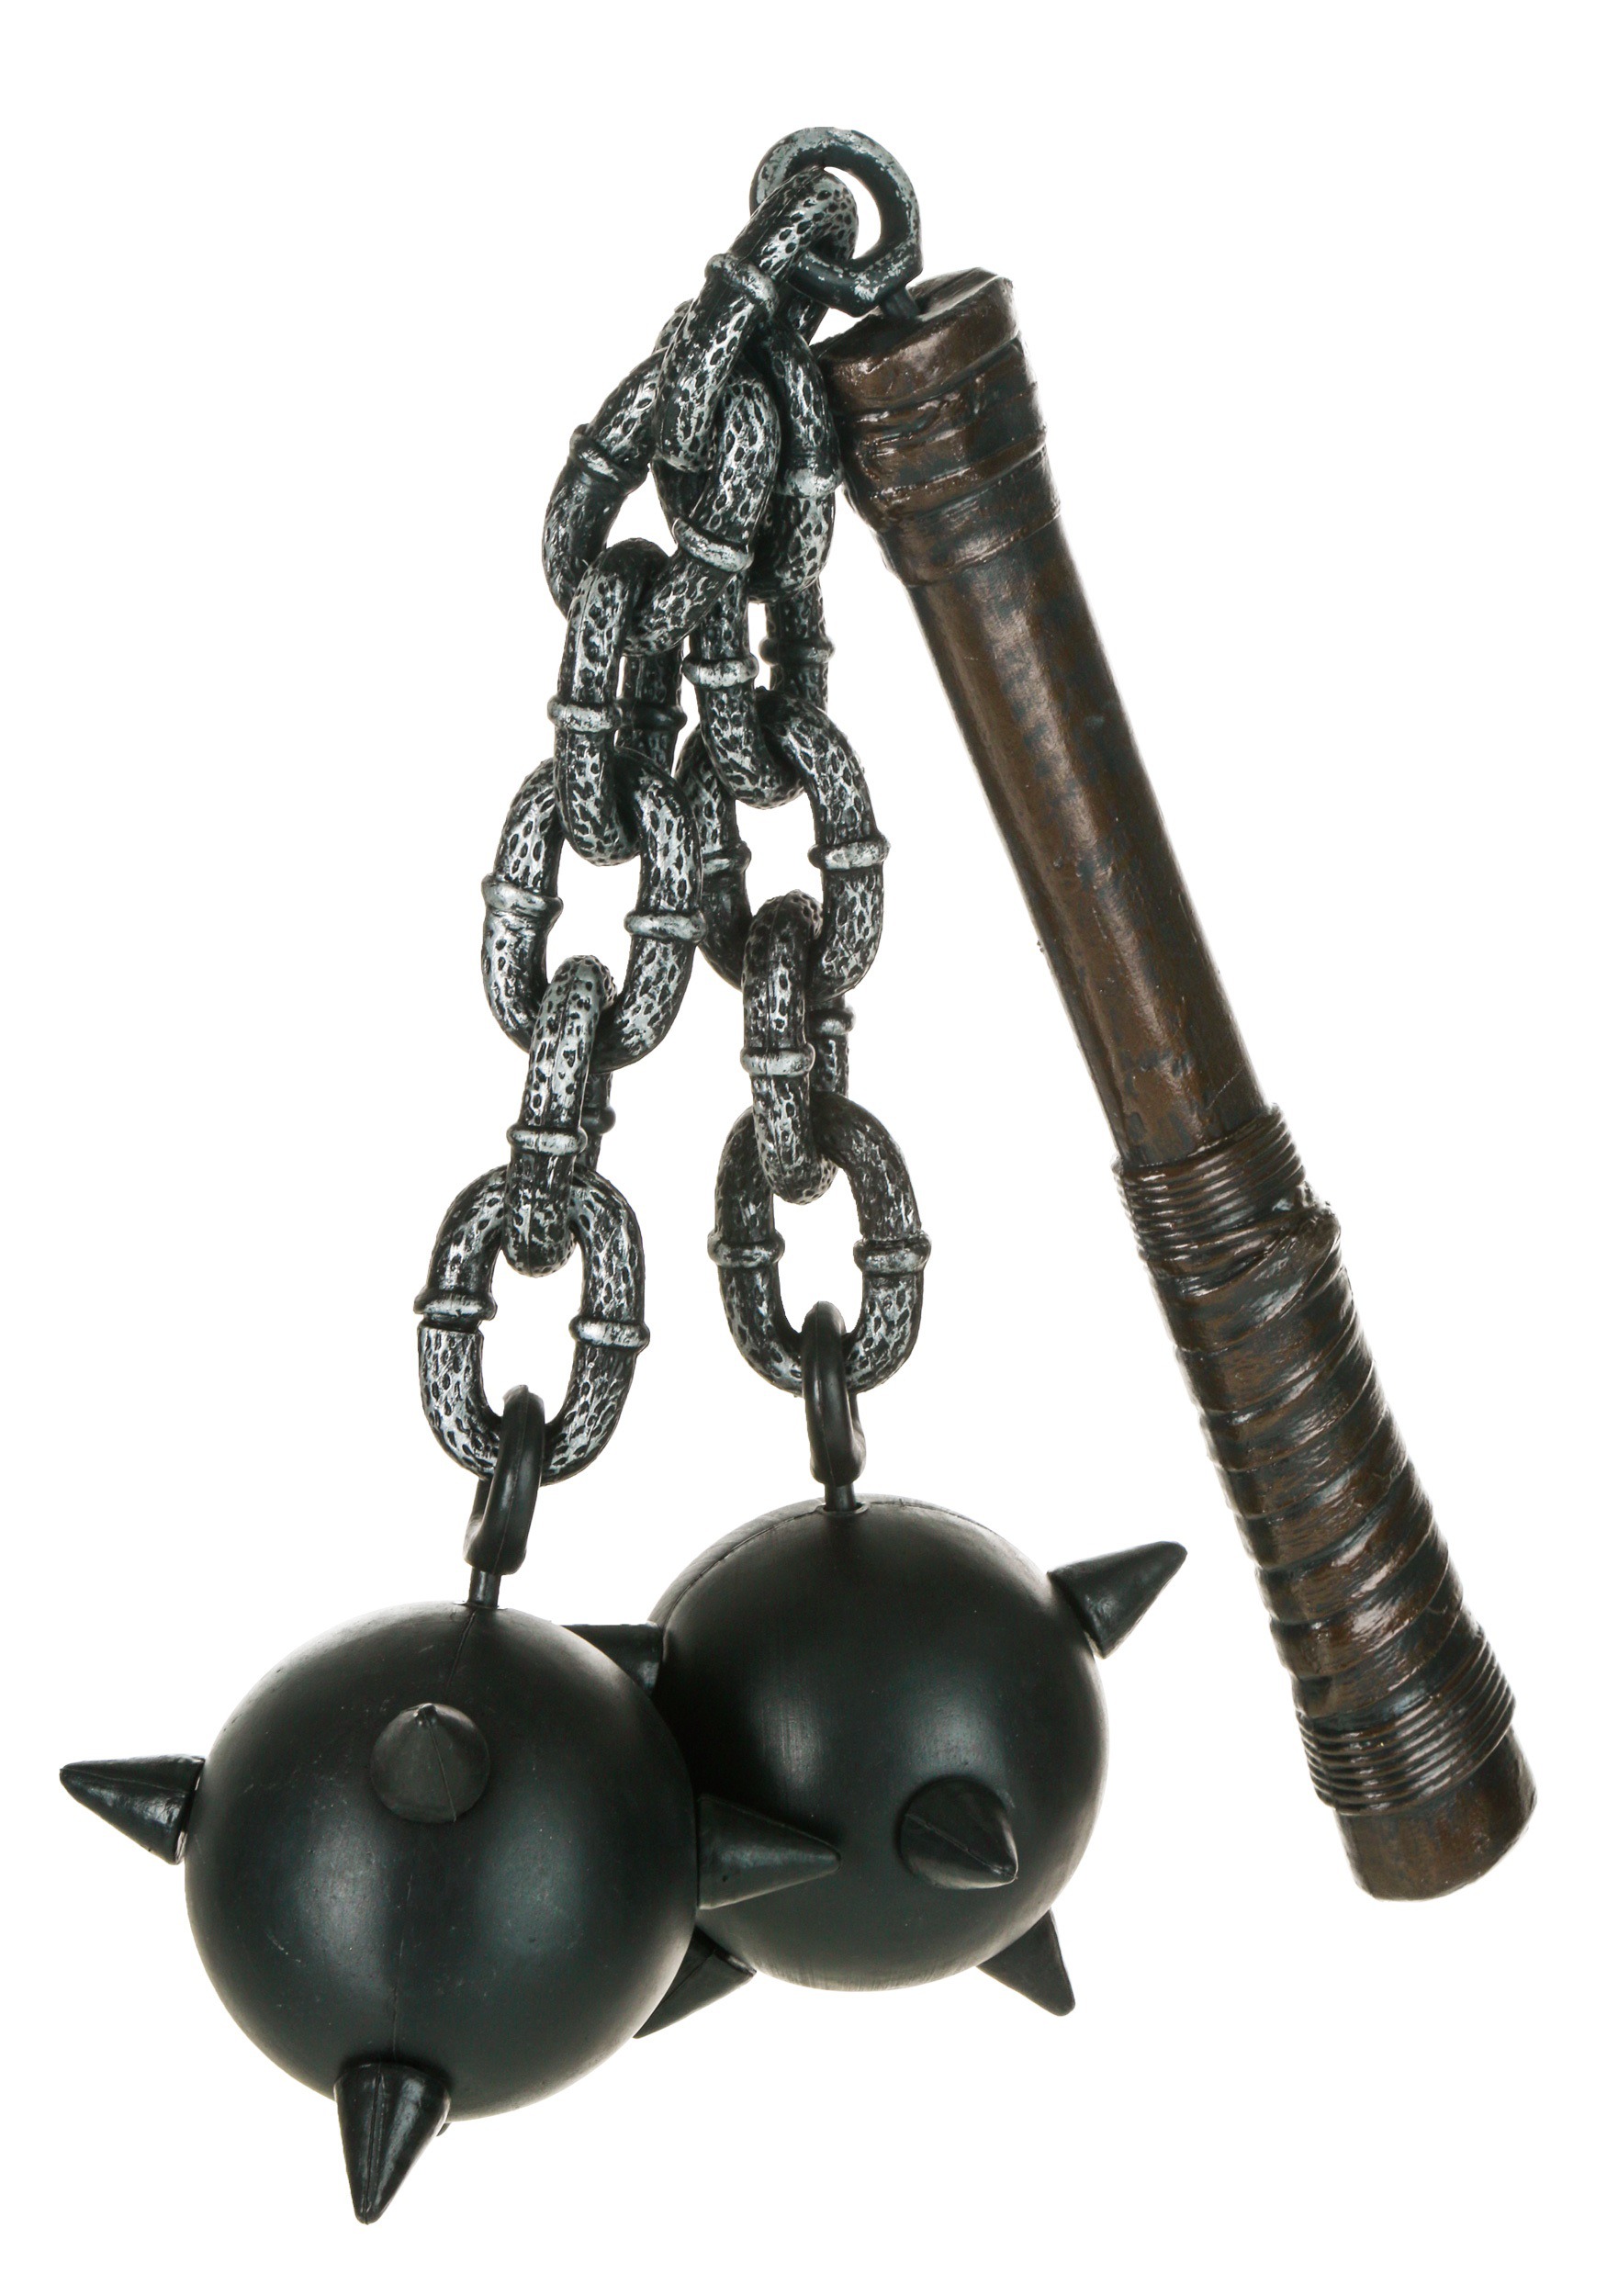 12 HUGE MEDIEVAL MACE W BALL & CHAIN INFLATE NOVELTY play TOY 36 in pretend play 